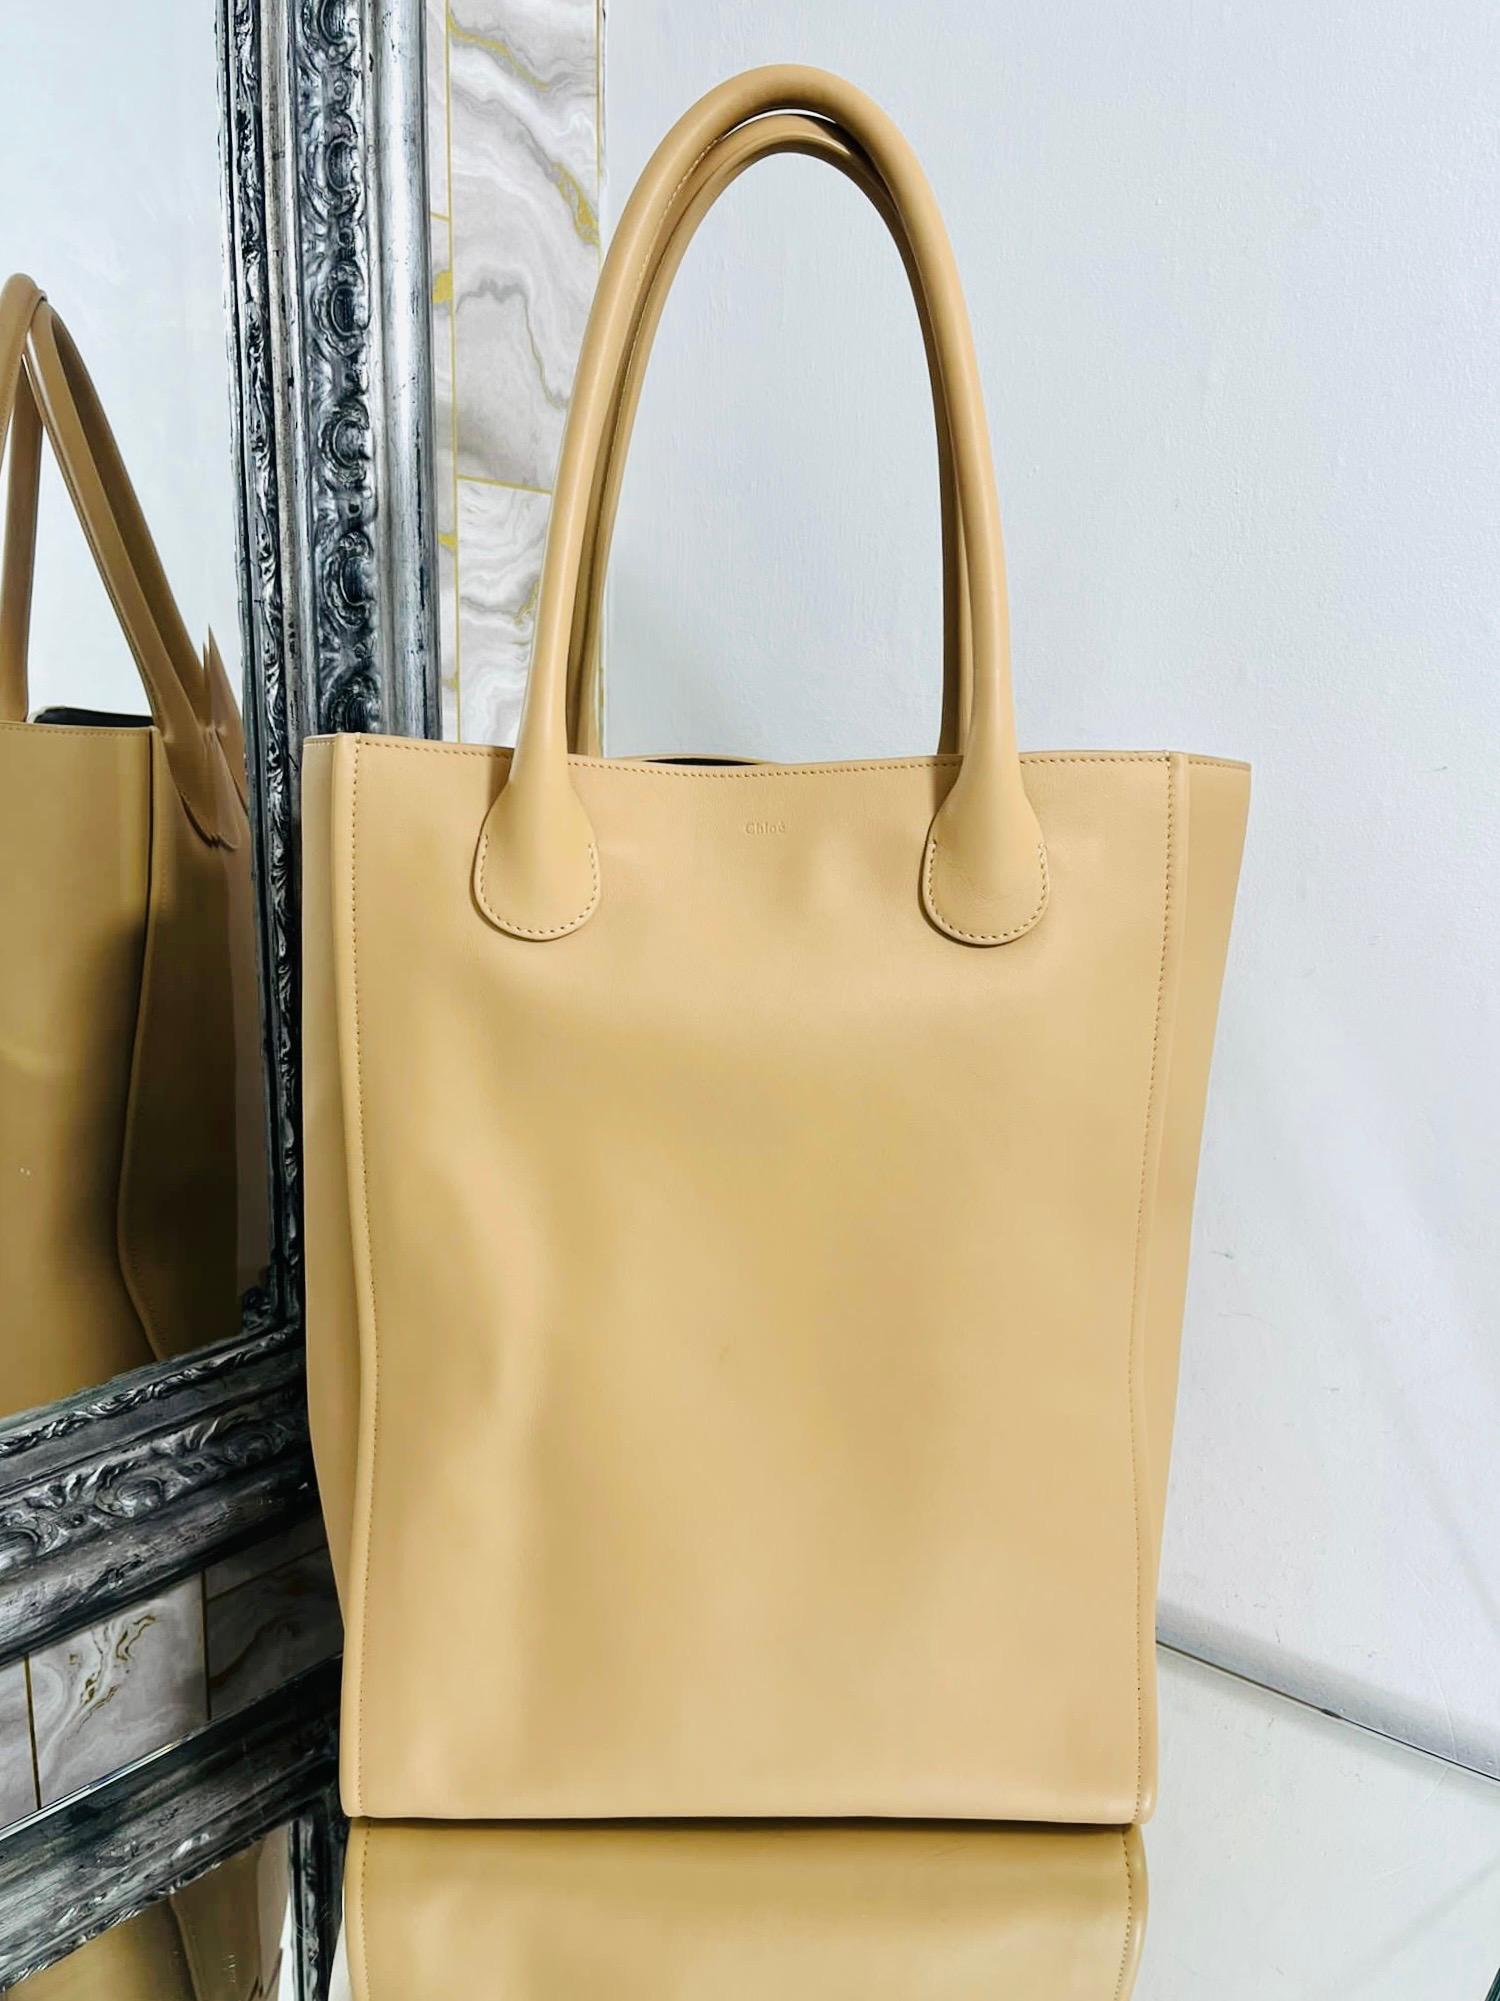 Chloe Soft Leather Tote Bag

Soft bodied shopper/tote bag in pale beige leather.

Embossed logo to the front.

Size - Height 40cm, Width 30cm, Depth 9cm

Condition - Very Good (One small mark to the leather)

Composition - Leather 

Comes With - Bag